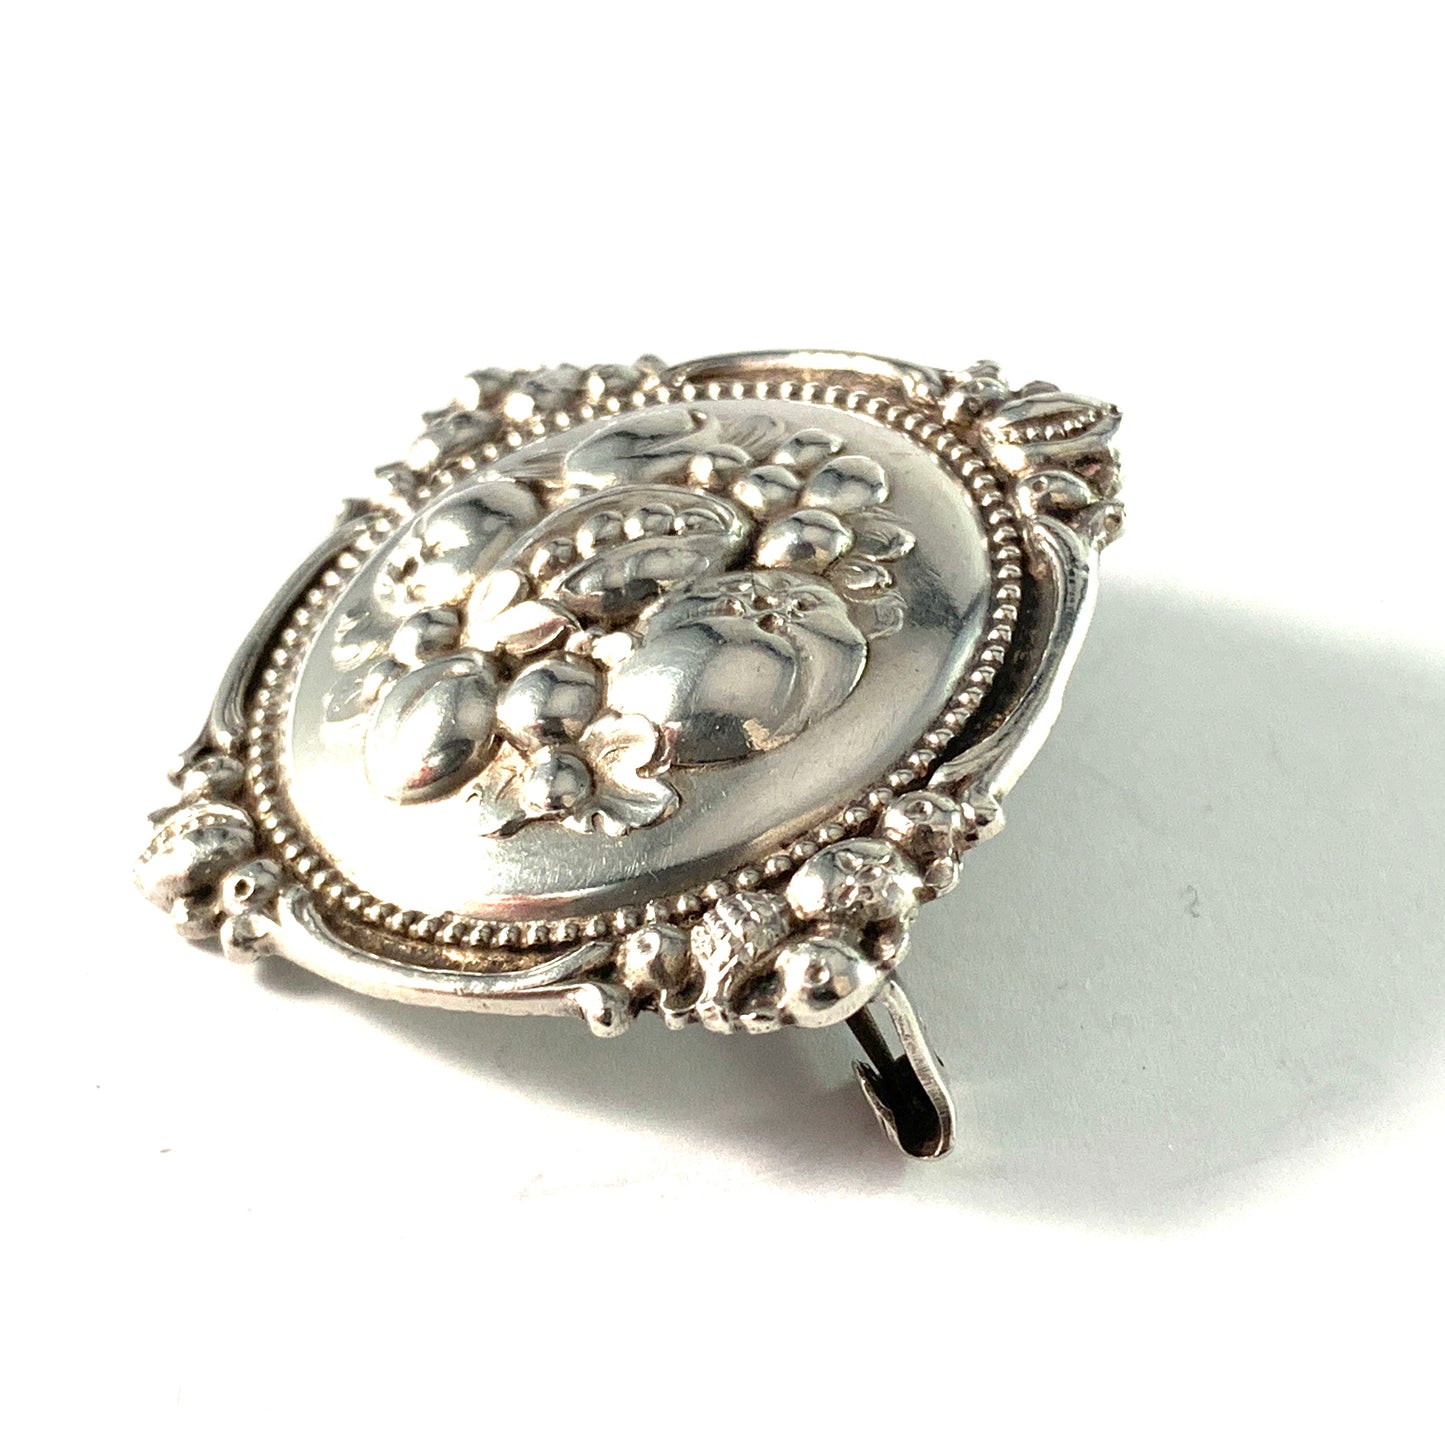 Maker HJ, Germany early 1900s. Antique 830 Silver Brooch.